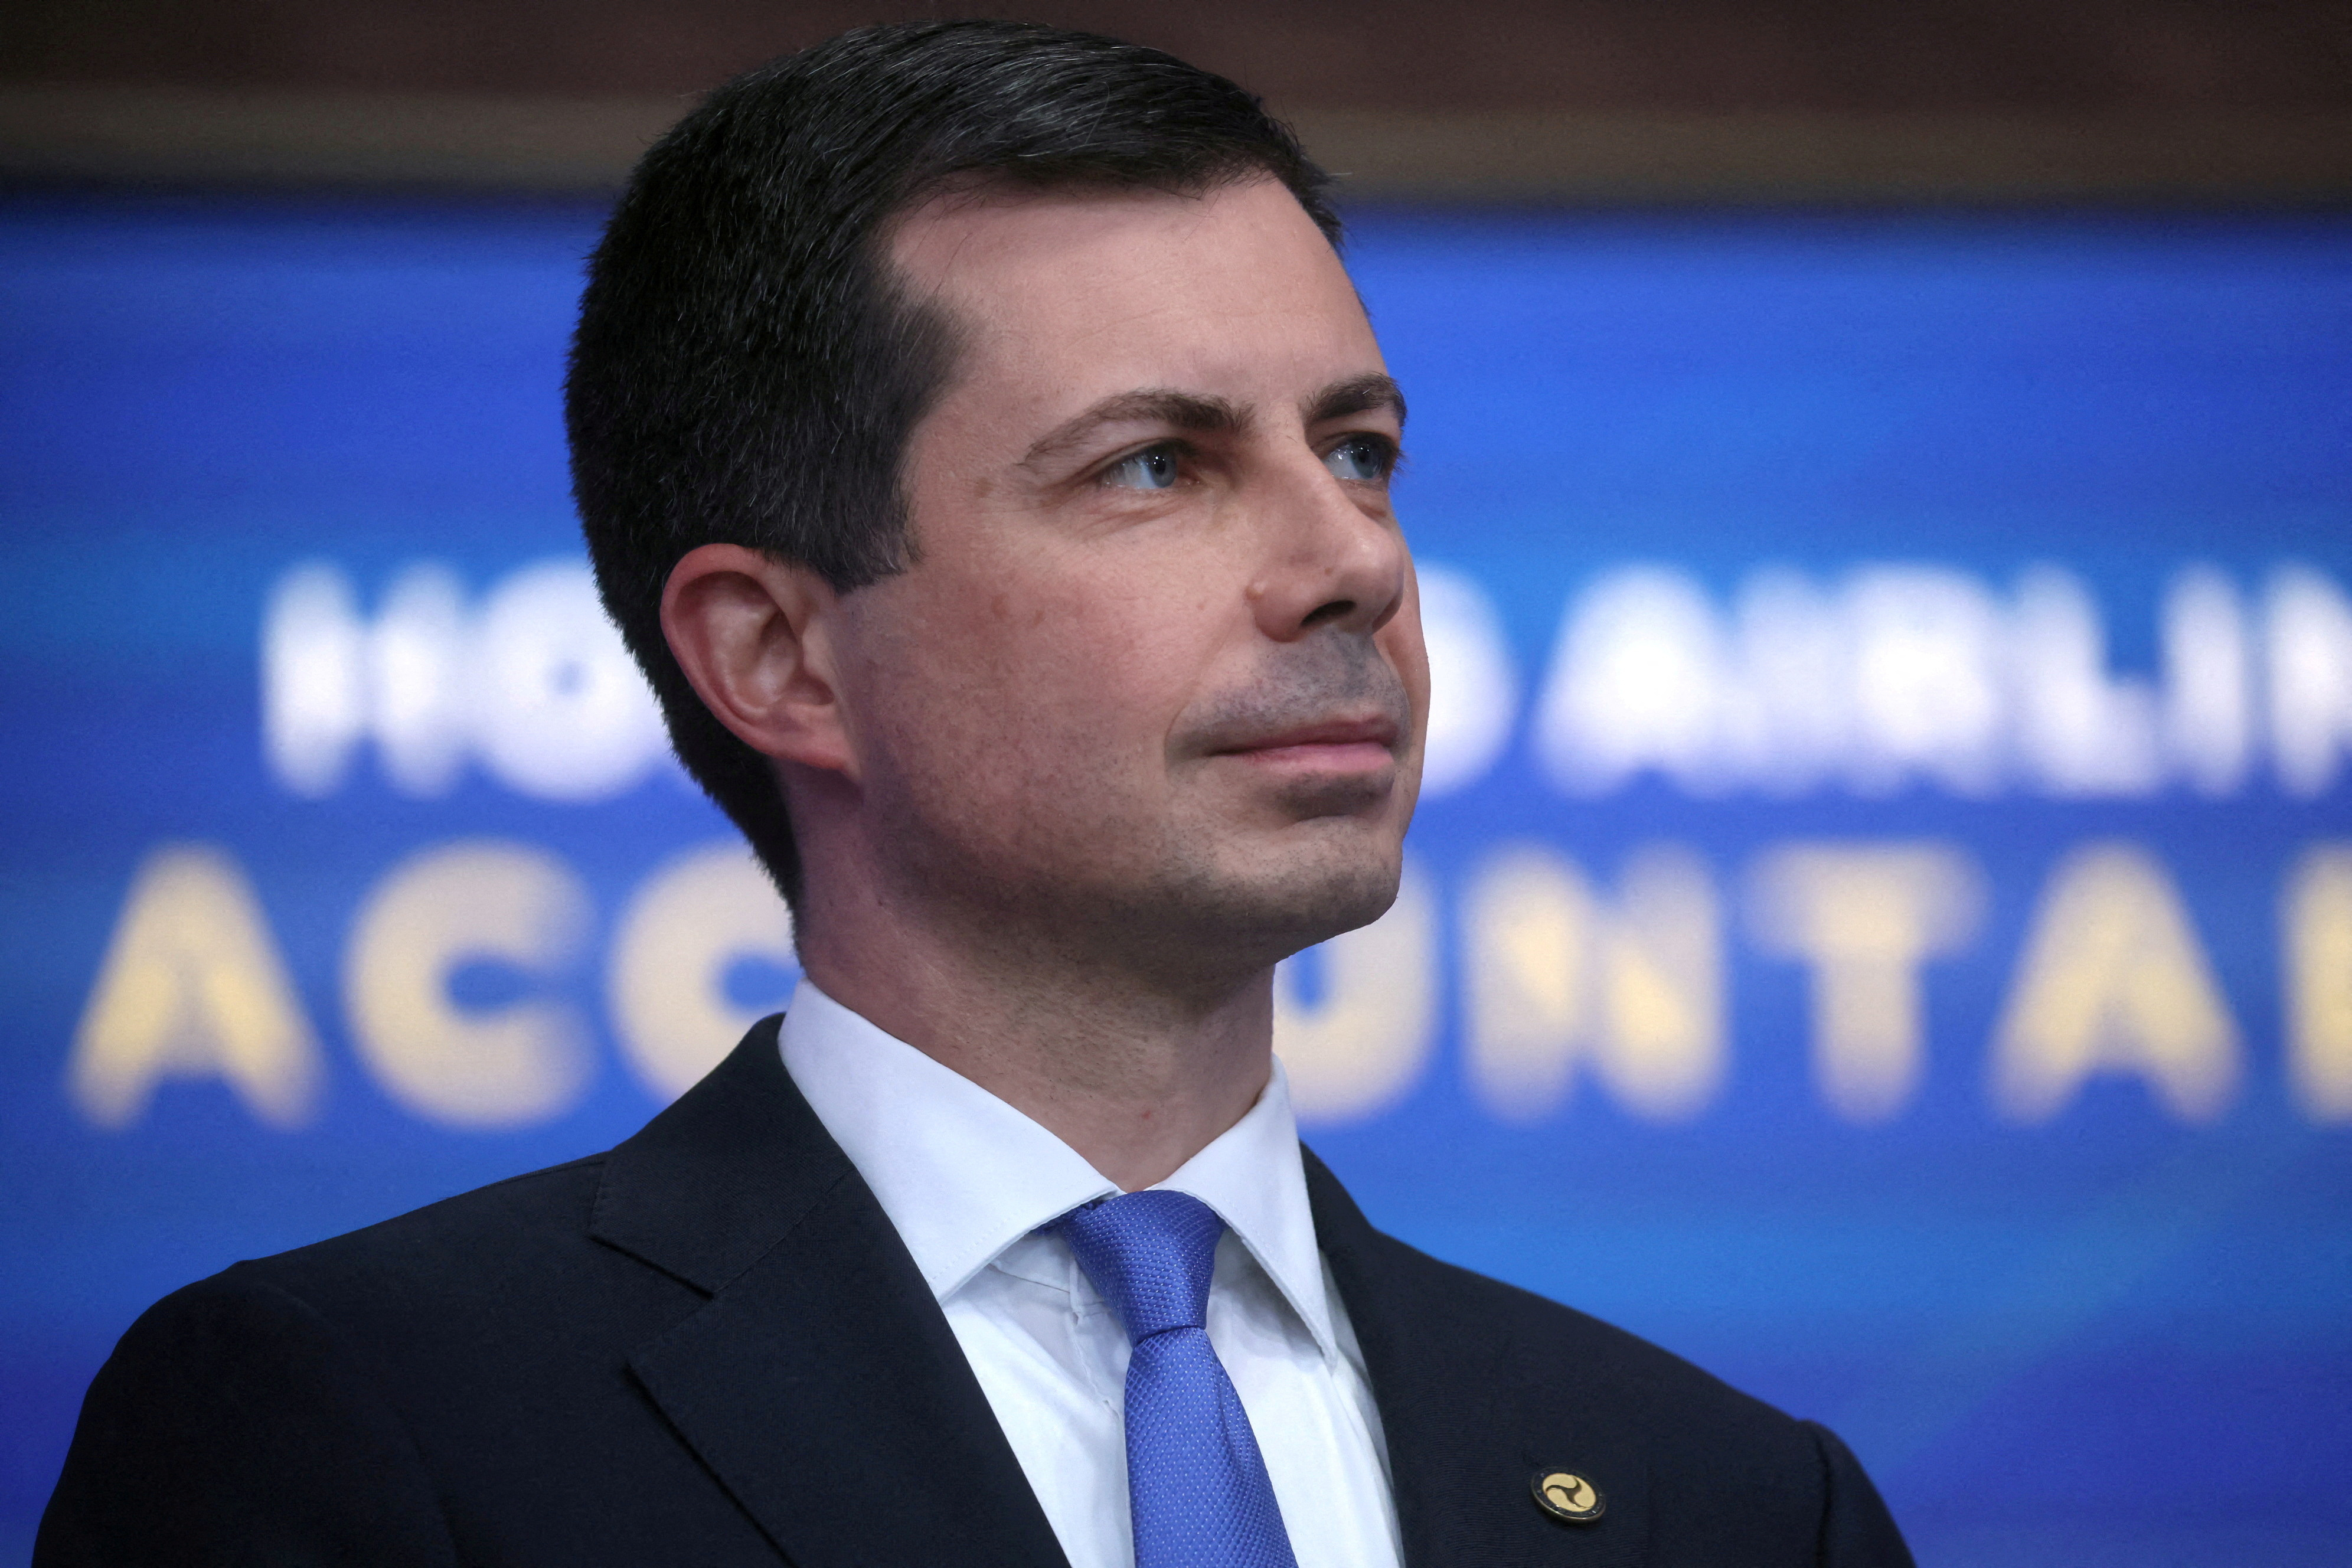 Secretary of Transportation Pete Buttigieg listens as U.S. President Biden speaks about the airline industry at the White House in Washington, U.S.